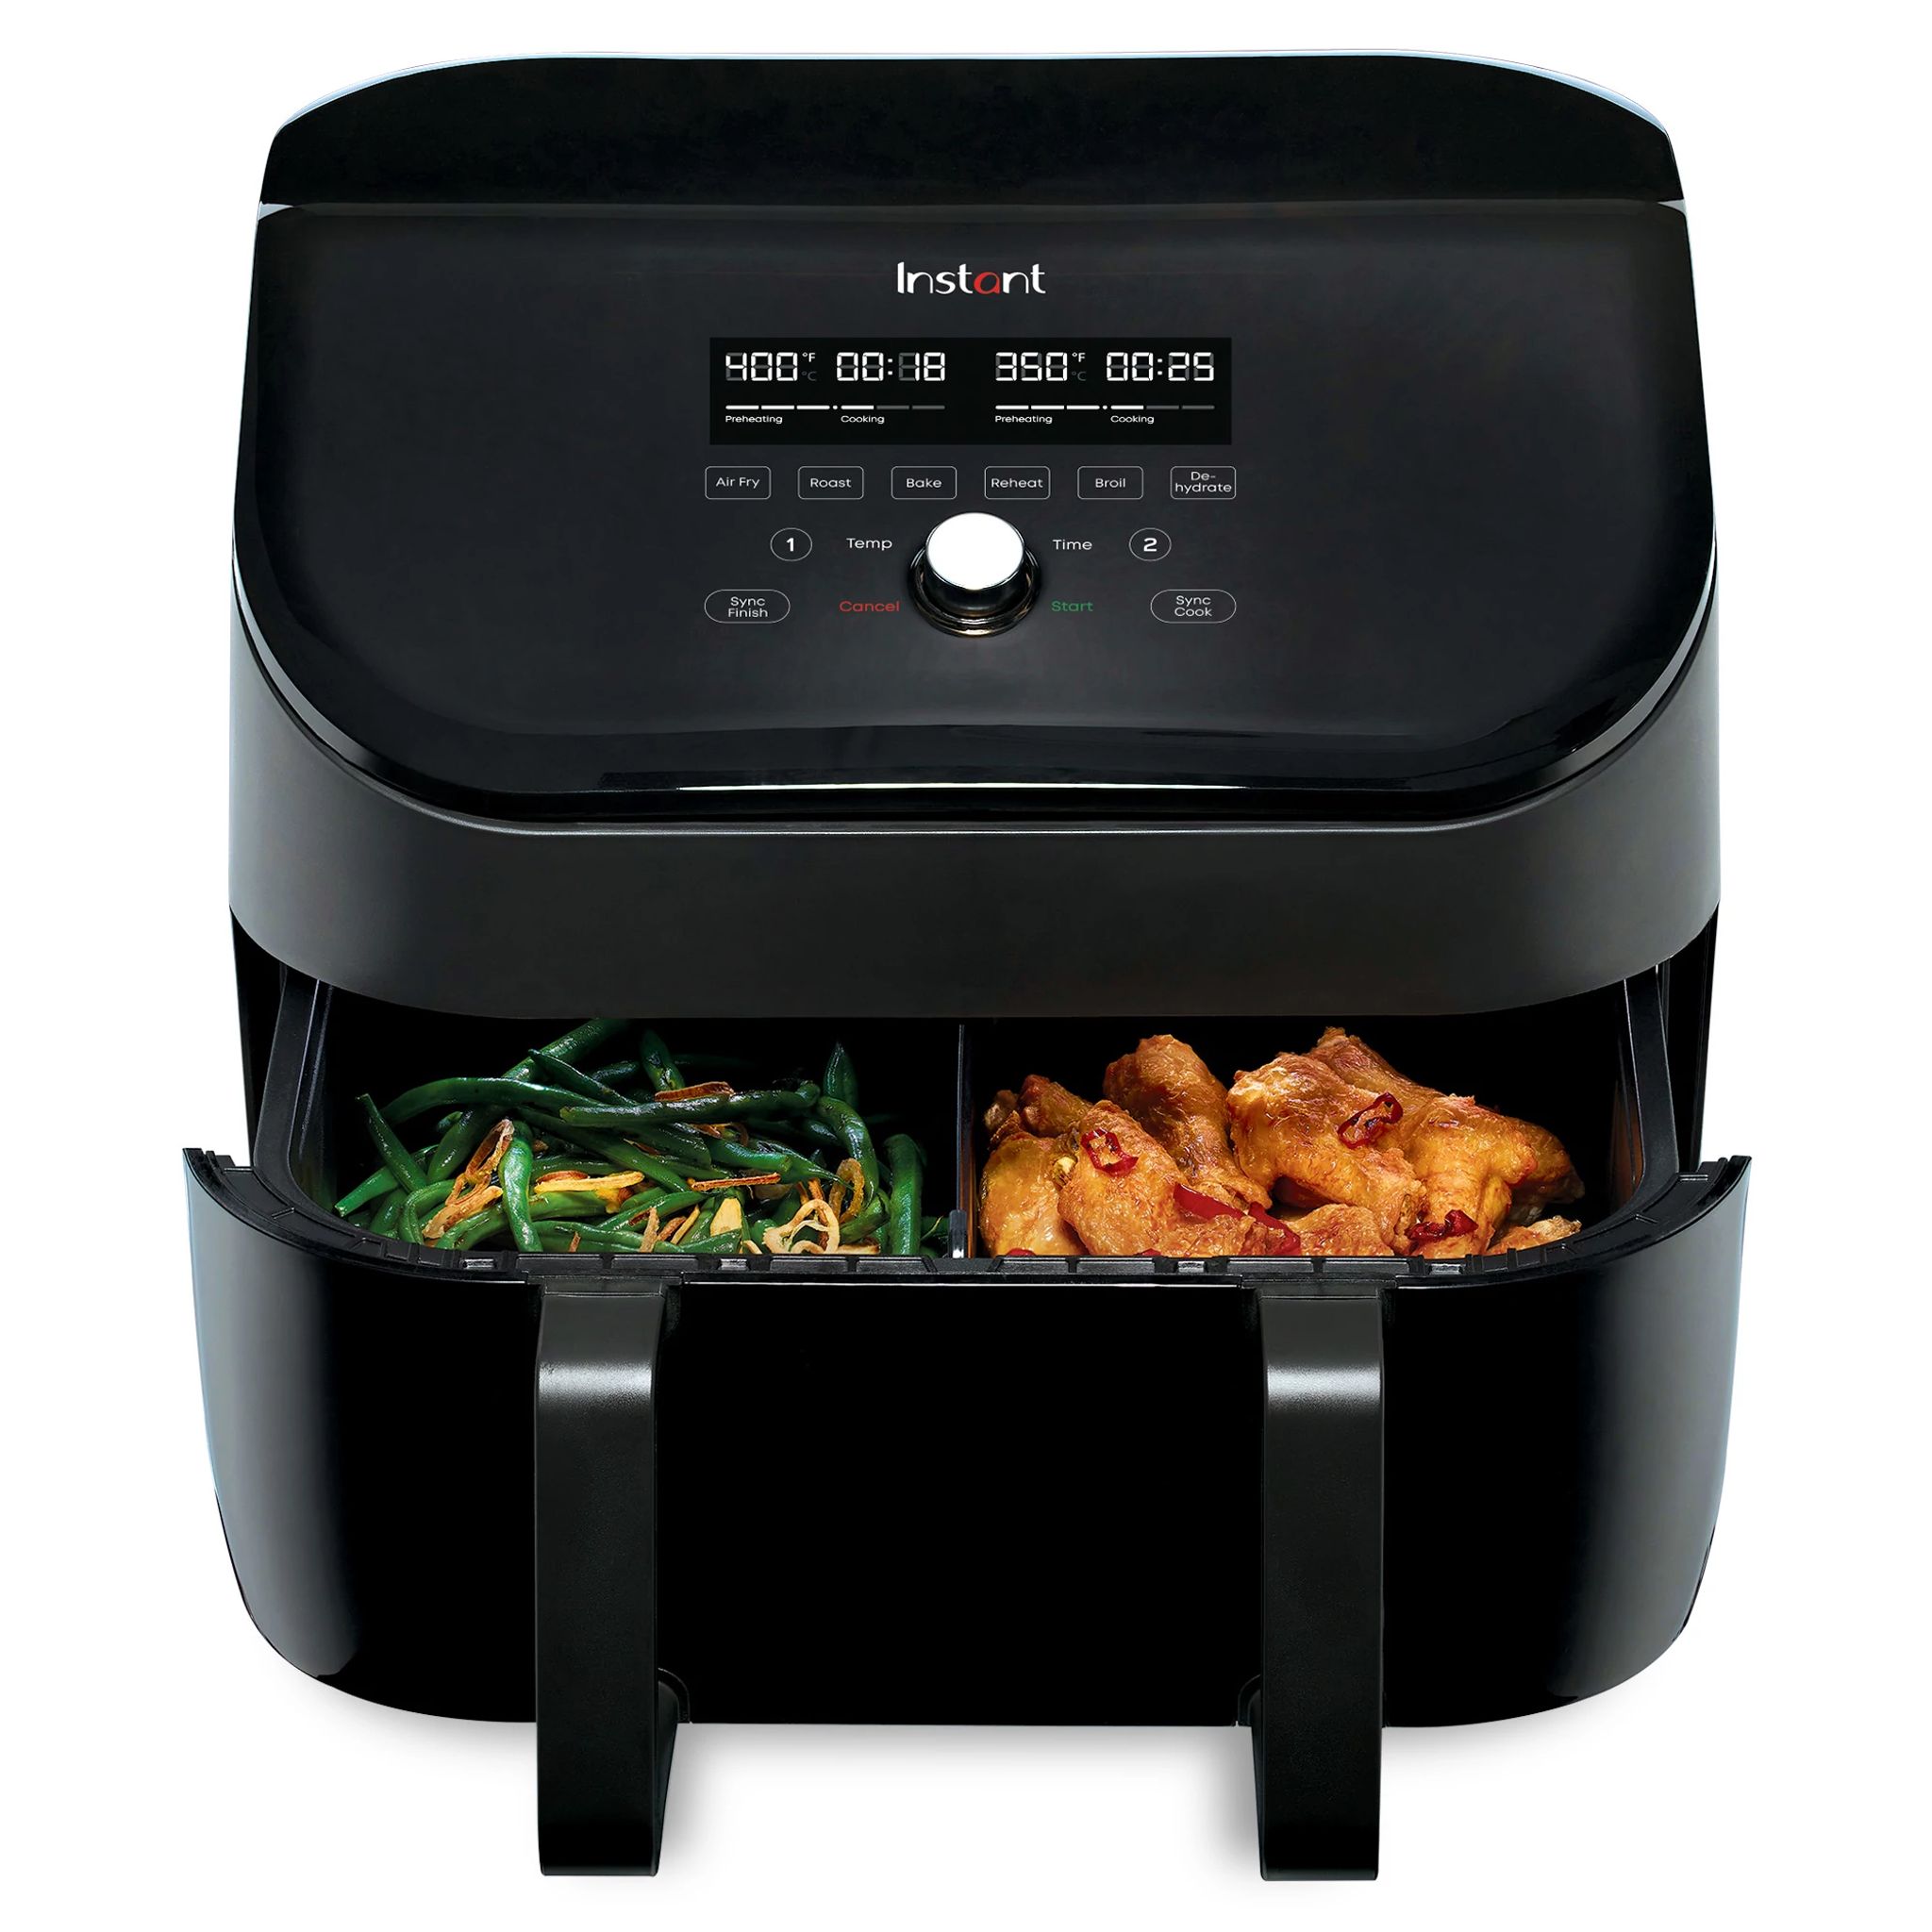  Instant Vortex Plus XL 8-quart Dual Basket Air Fryer Oven, From  the Makers of Instant Pot, 2 Independent Frying Baskets, ClearCook Windows,  Dishwasher-Safe Baskets, App with over 100 Recipes,Black : Home